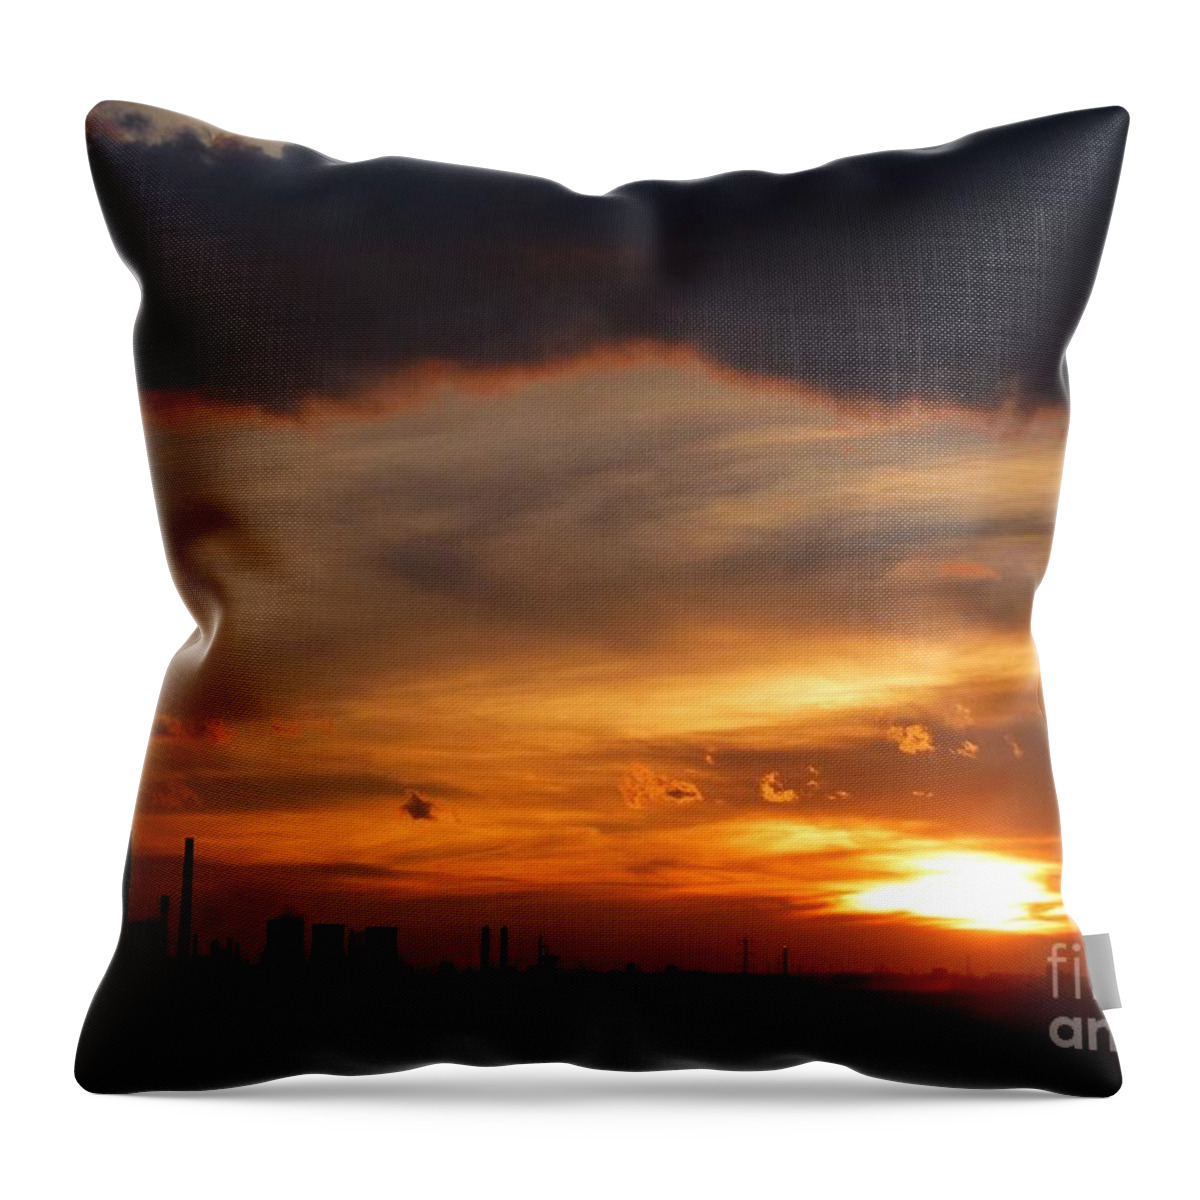 Industry Throw Pillow featuring the photograph Industrialization 2 by Amalia Suruceanu